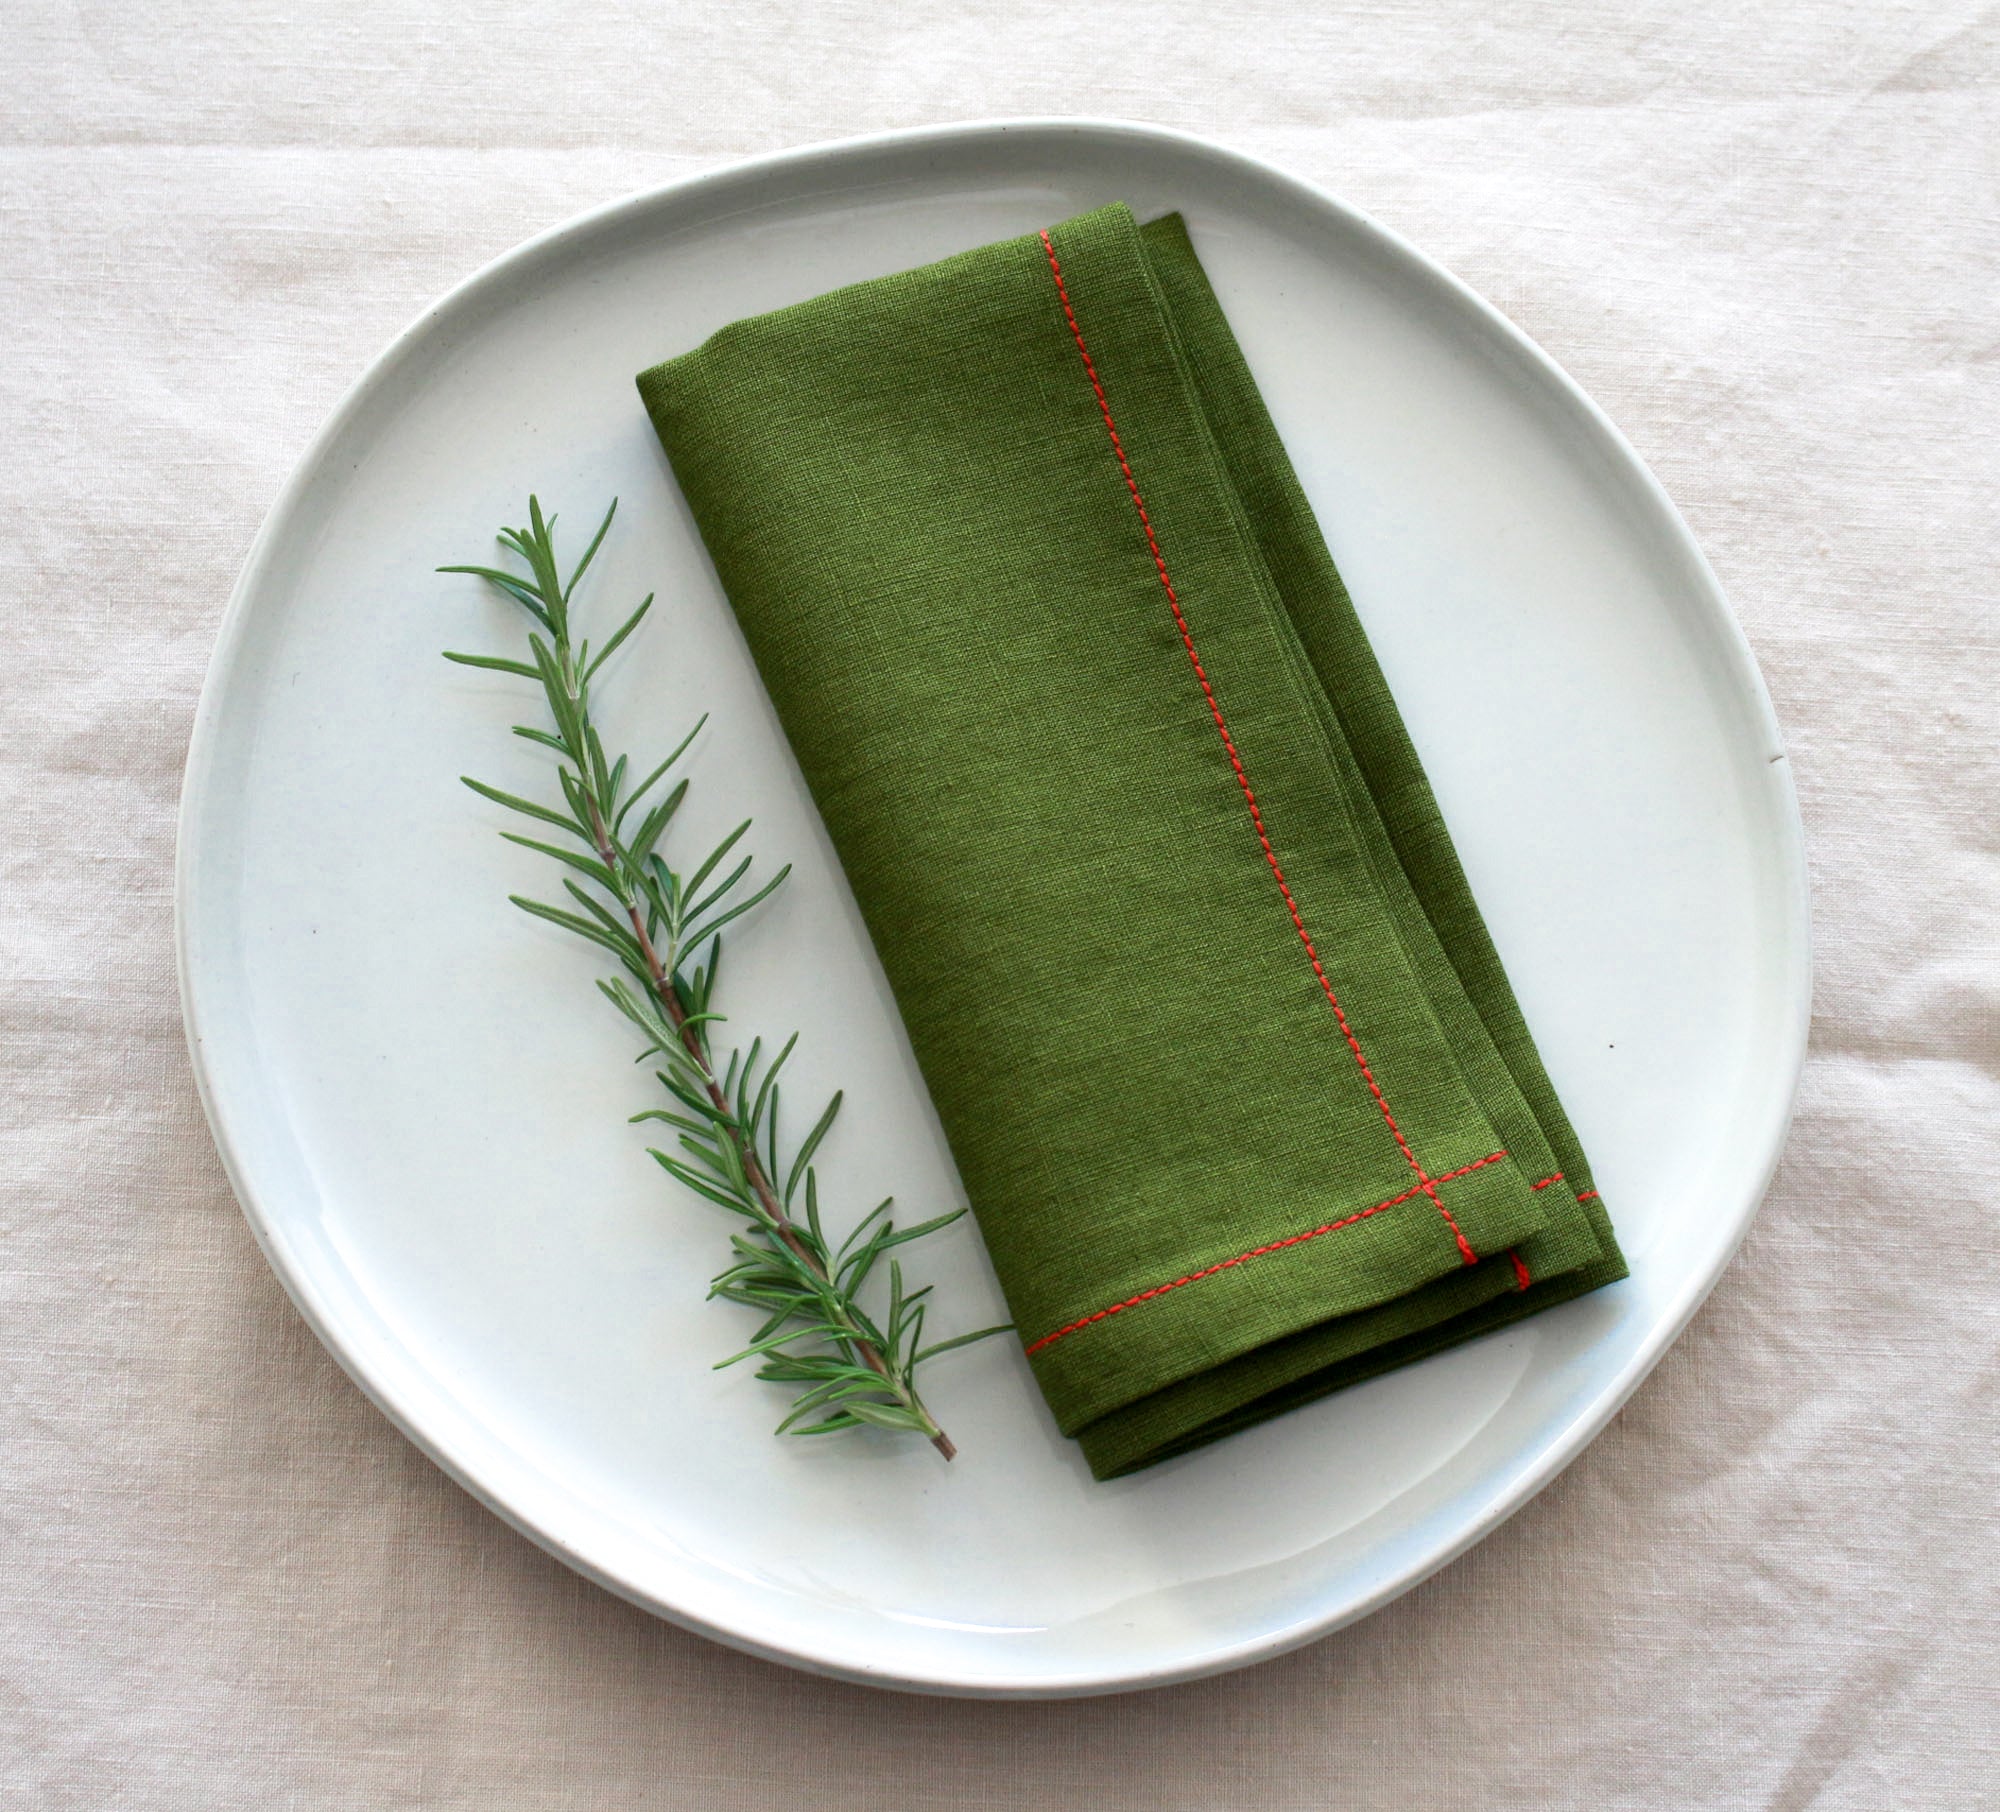 Green Napkin Set with Contrast Edges - Set of 2 or 4 – My Kitchen Linens